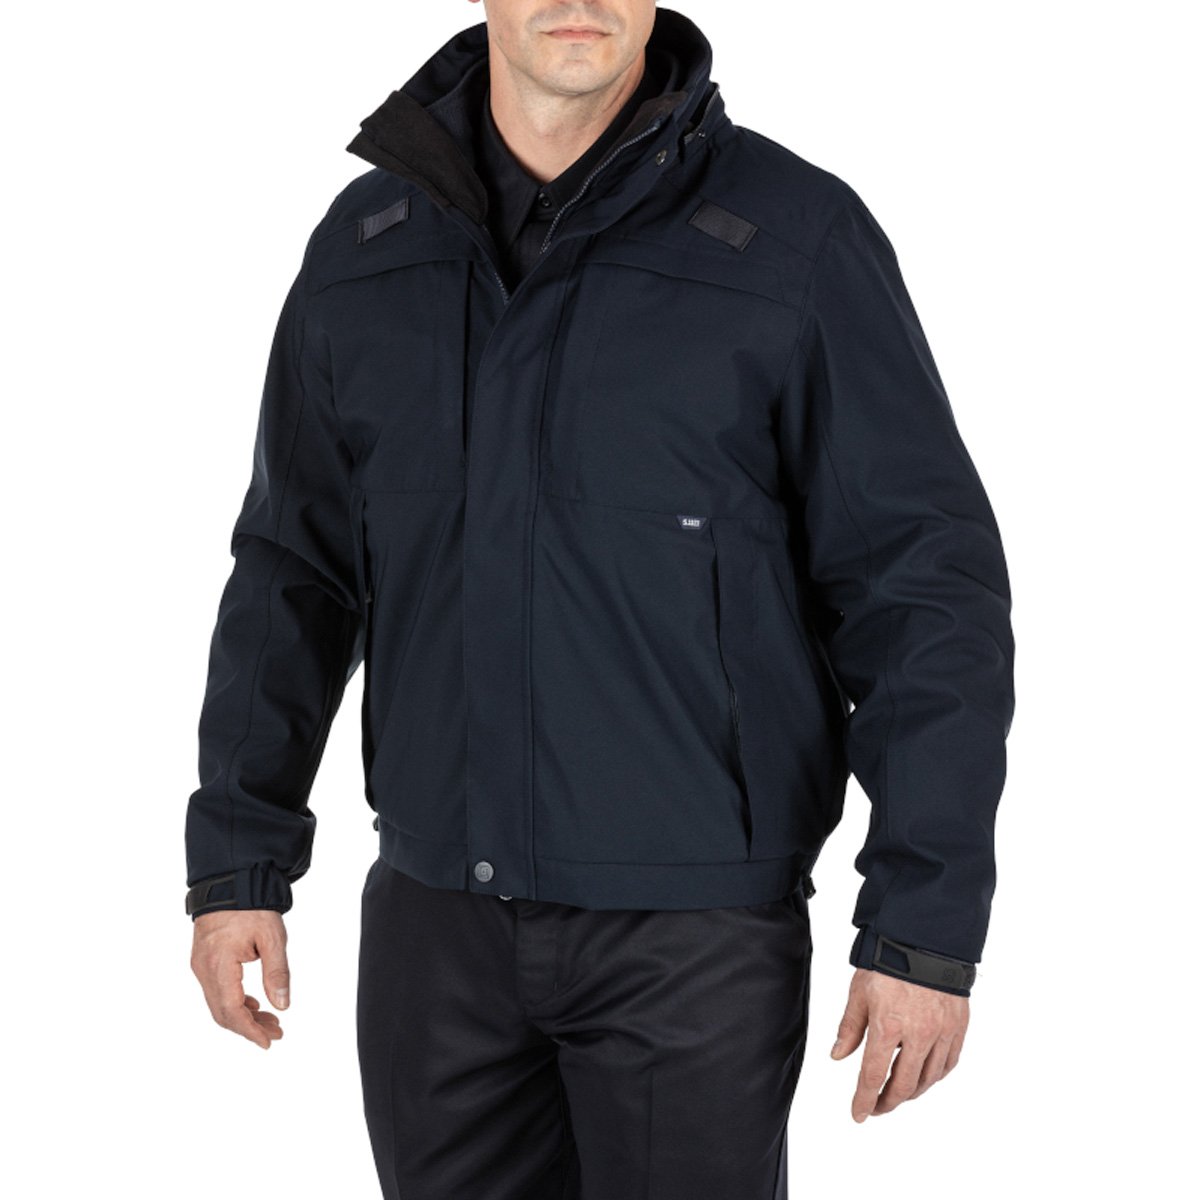 5.11 Tactical 5-IN-1 Jacket 2.0 Outerwear 5.11 Tactical Dark Navy Small Tactical Gear Supplier Tactical Distributors Australia